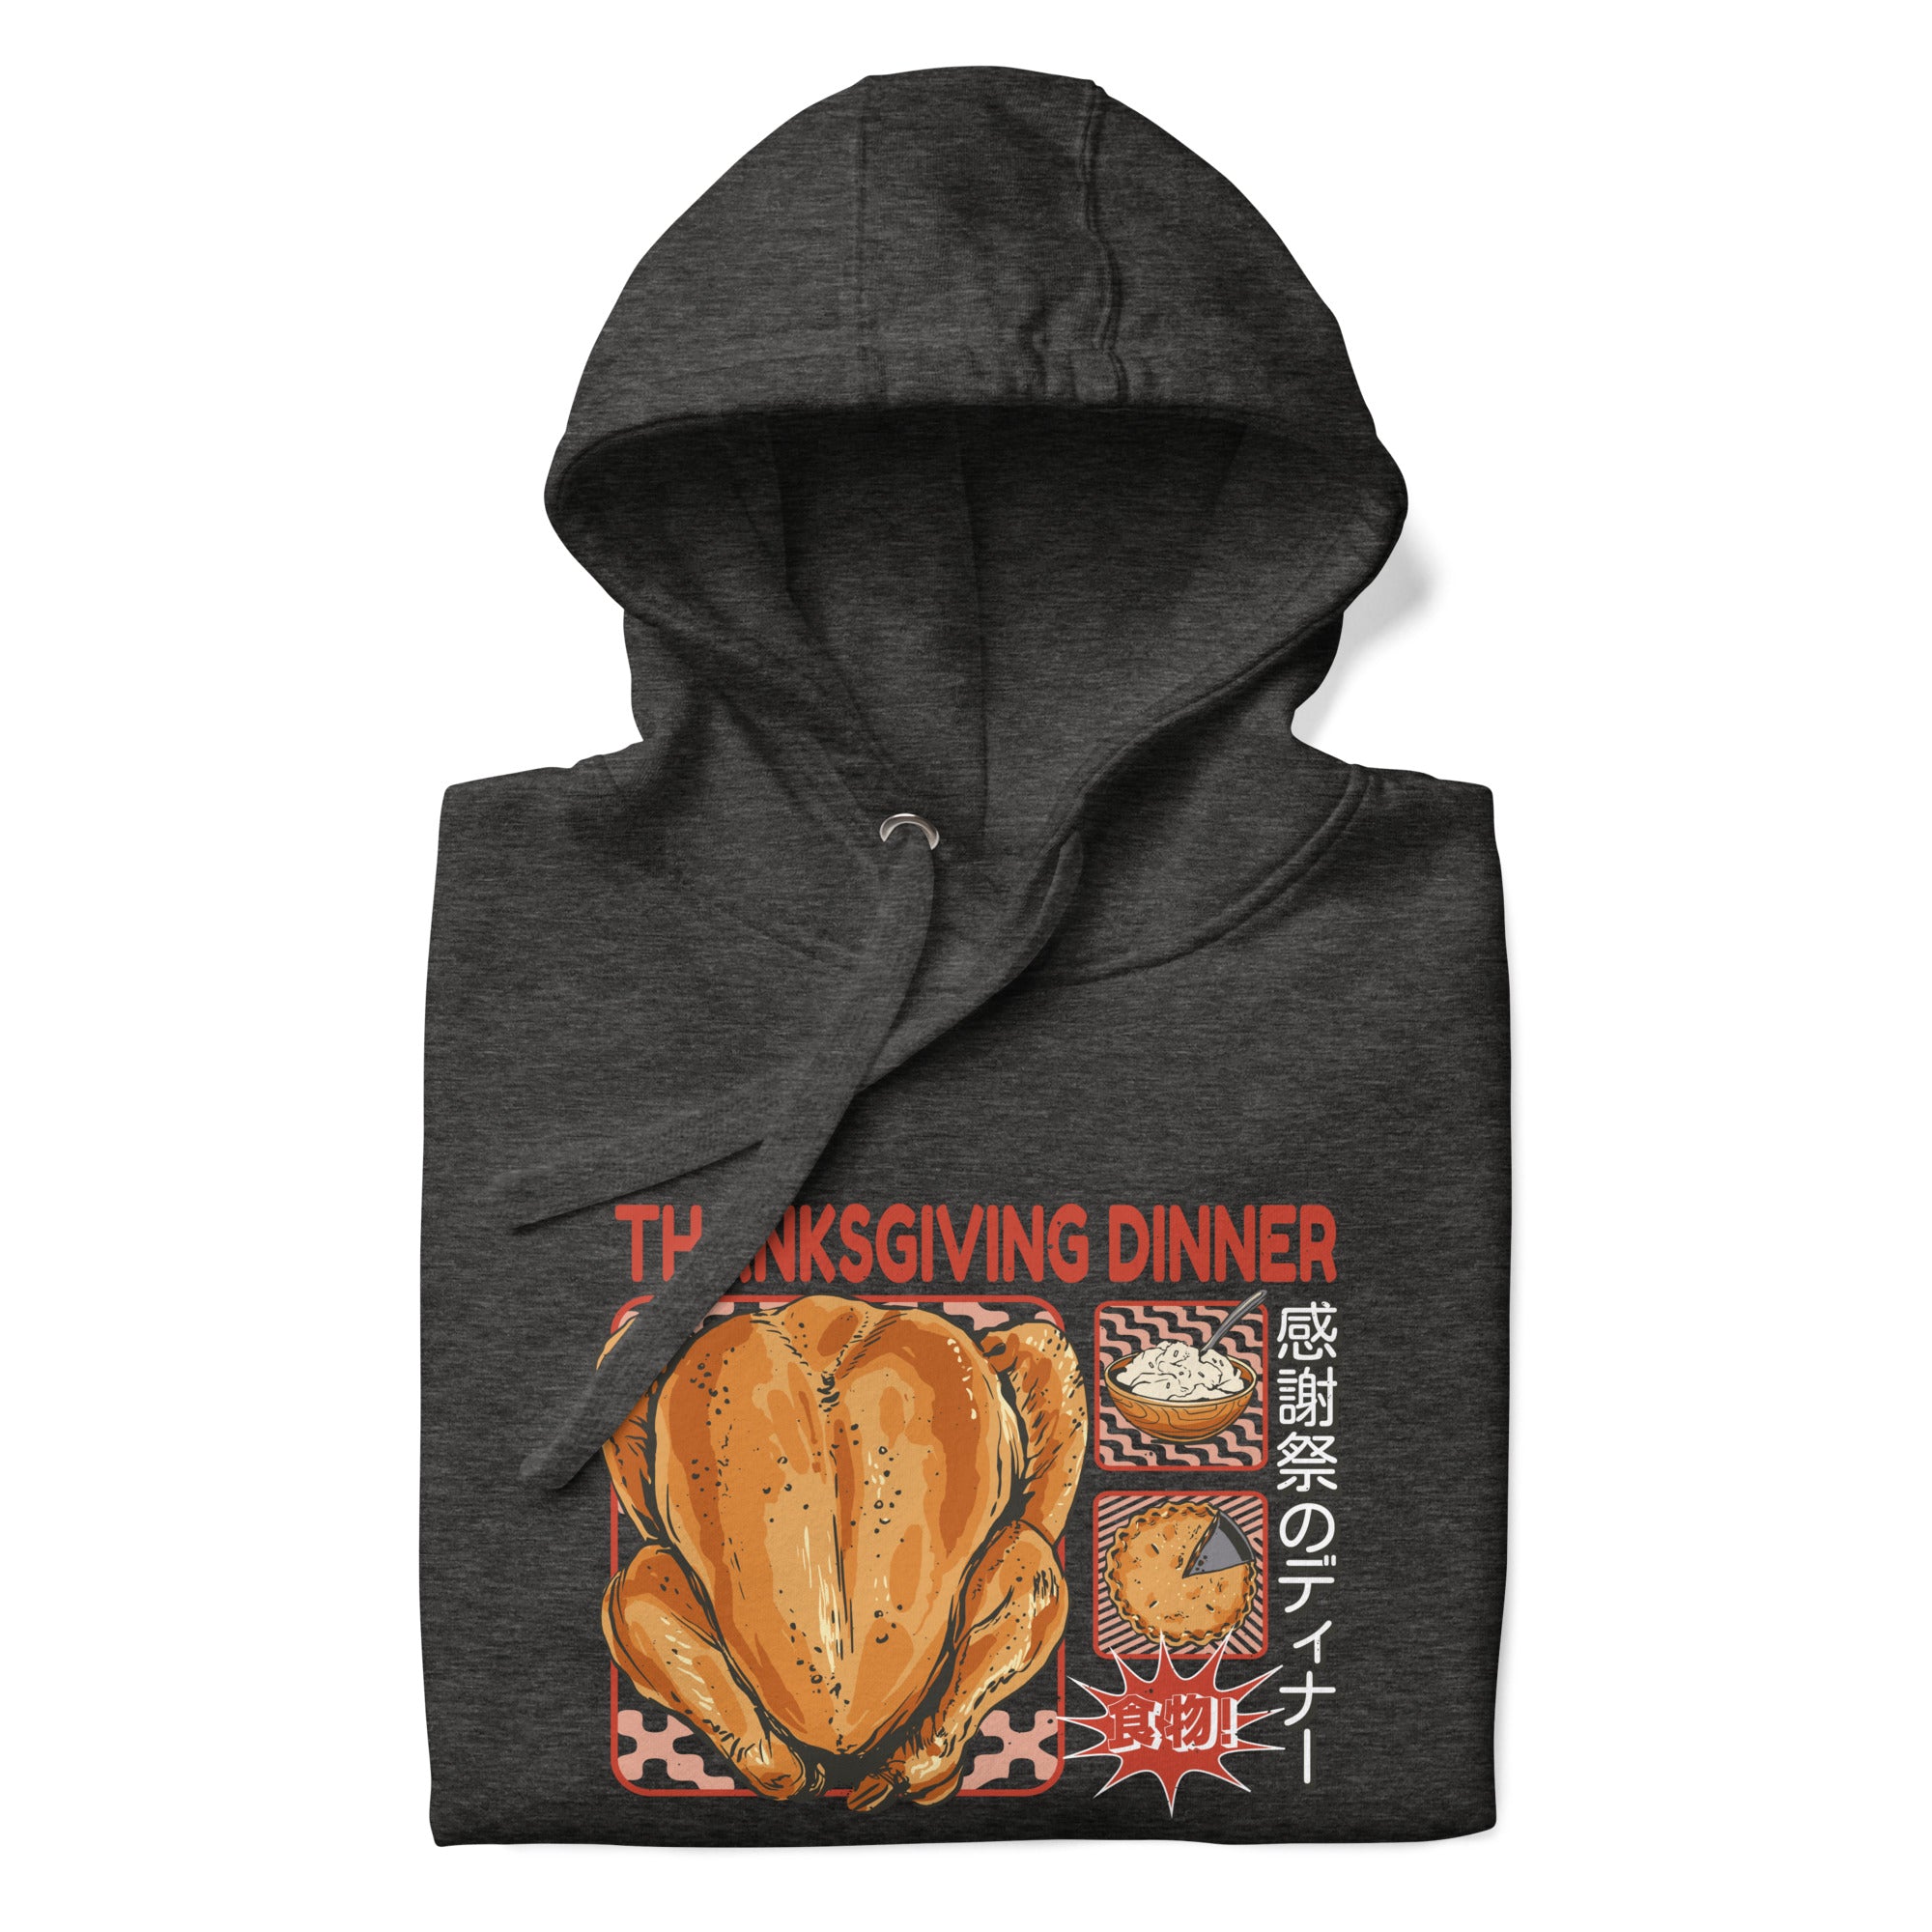 Folded Japanese Thanksgiving Hoodie in Charcoal Heather color: A dark gray hoodie with a heathered texture, featuring a graphic of a Japanese Thanksgiving meal, including a roast chicken, Japanese potato salad, and an apple pie. The hoodie is neatly folded.